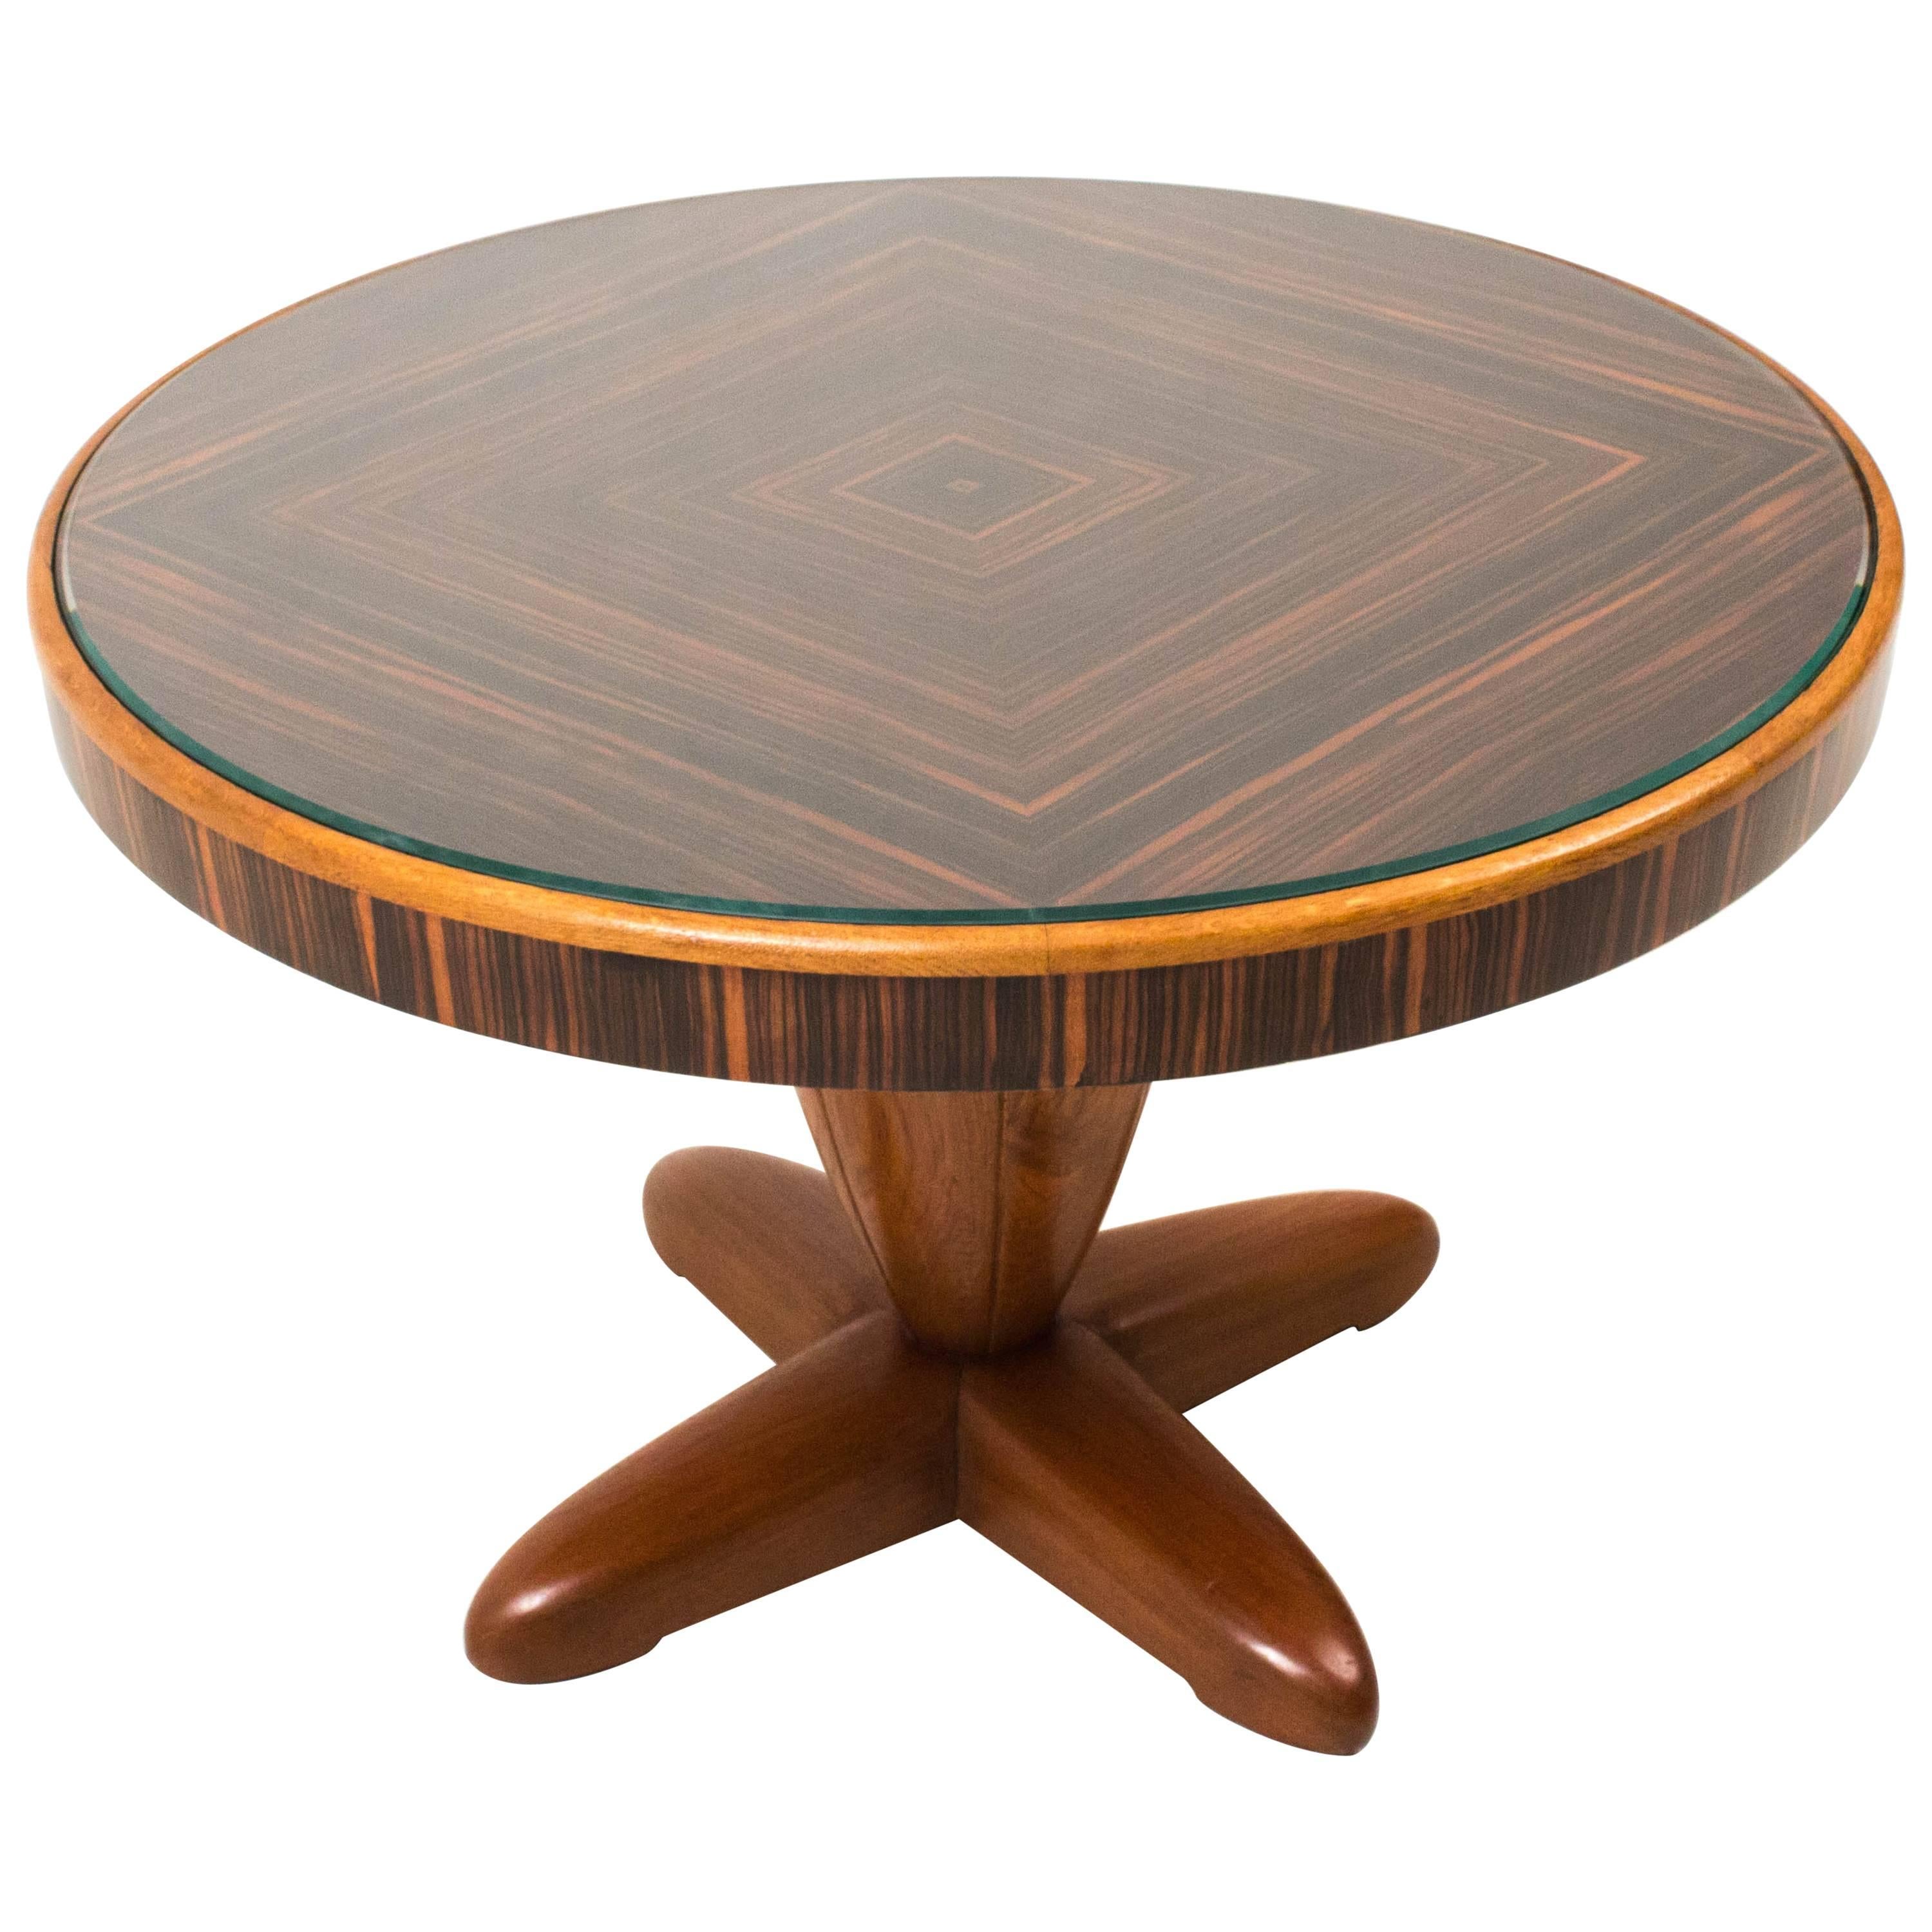 Stunning and Rare Art Deco Coffee Table by Paul Bromberg for Pander, 1931